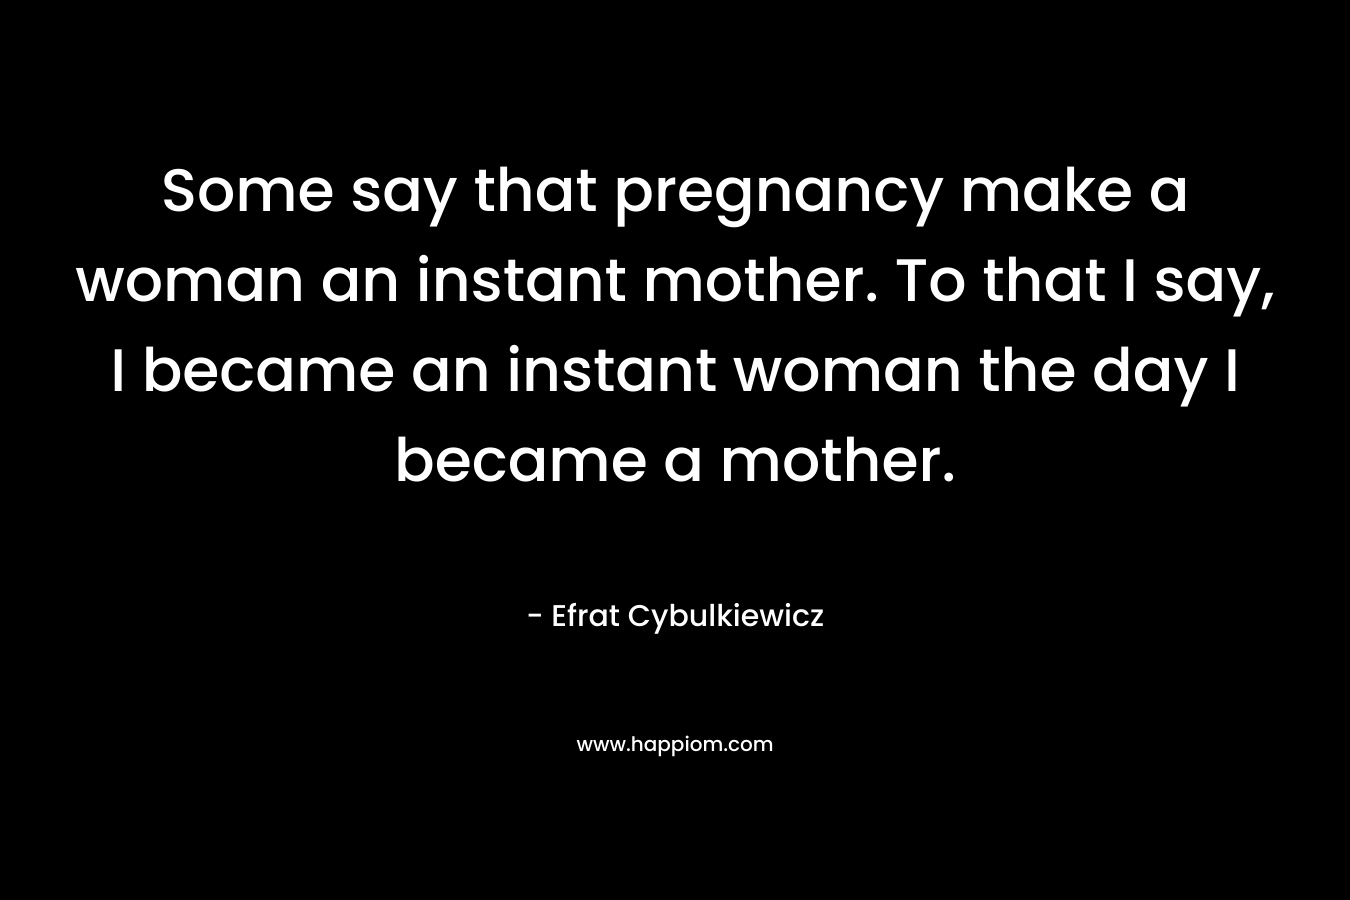 Some say that pregnancy make a woman an instant mother. To that I say, I became an instant woman the day I became a mother.